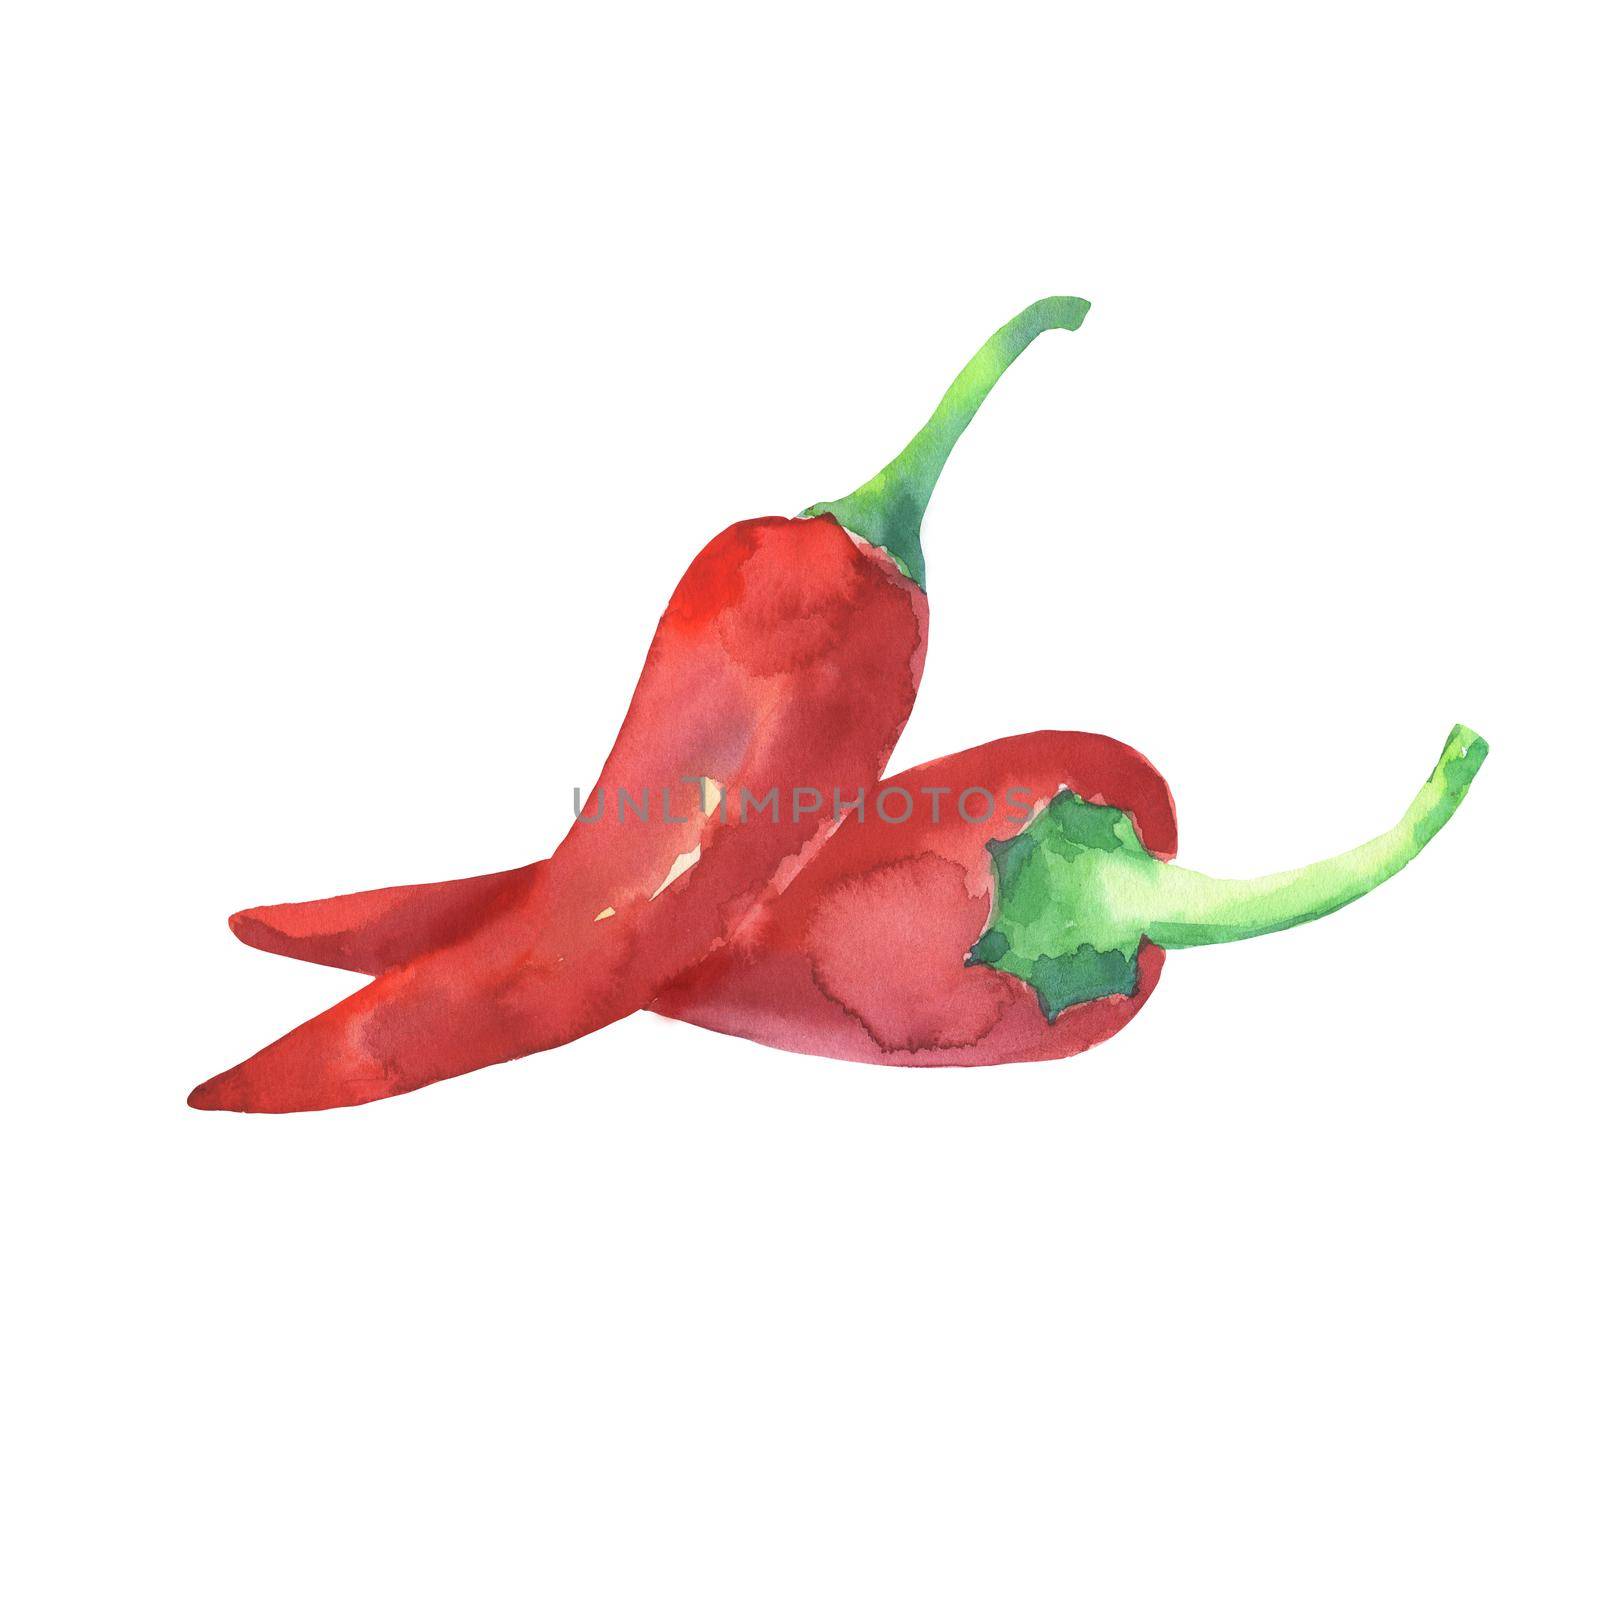 Red hot chili peppers. Hand drawing watercolor sketch isolated on white by ElenaPlatova